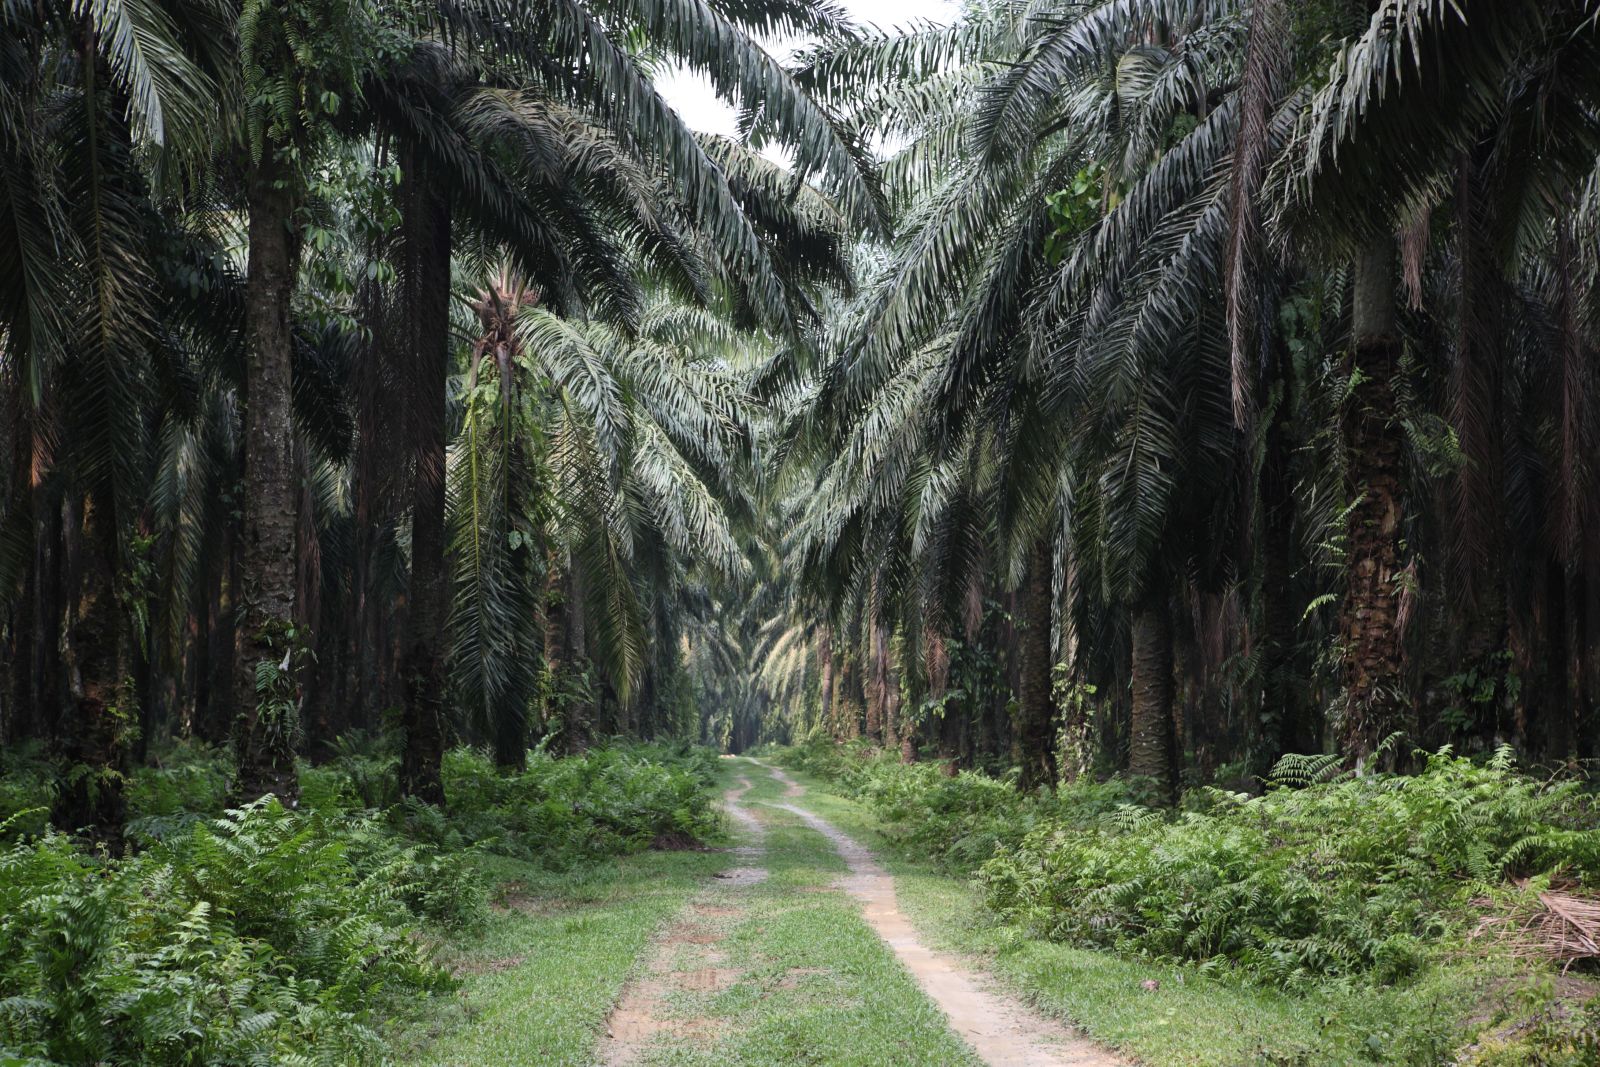 Natural forests have given way to palm oil plantations.